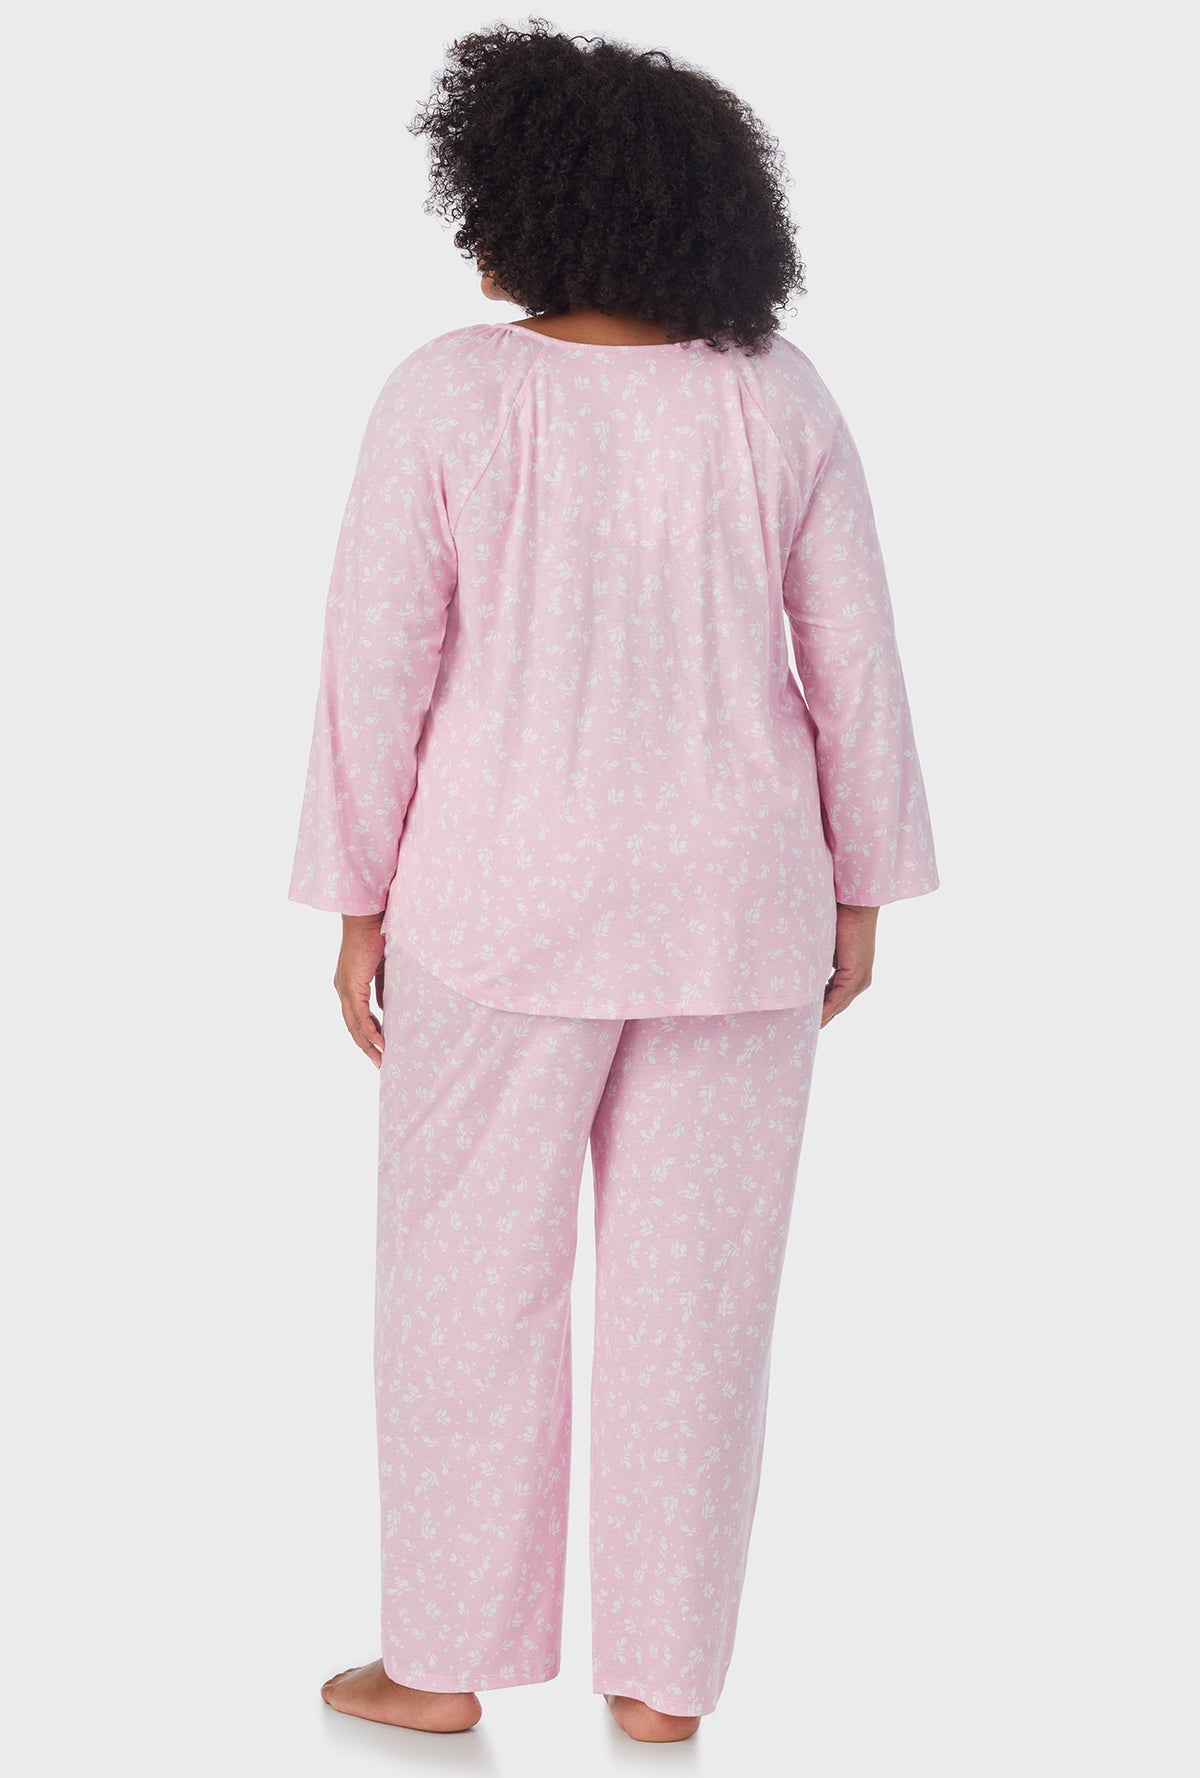 A lady wearing pink 3/4 Sleeve Long Pant plus size PJ Set with White Rosebuds  print